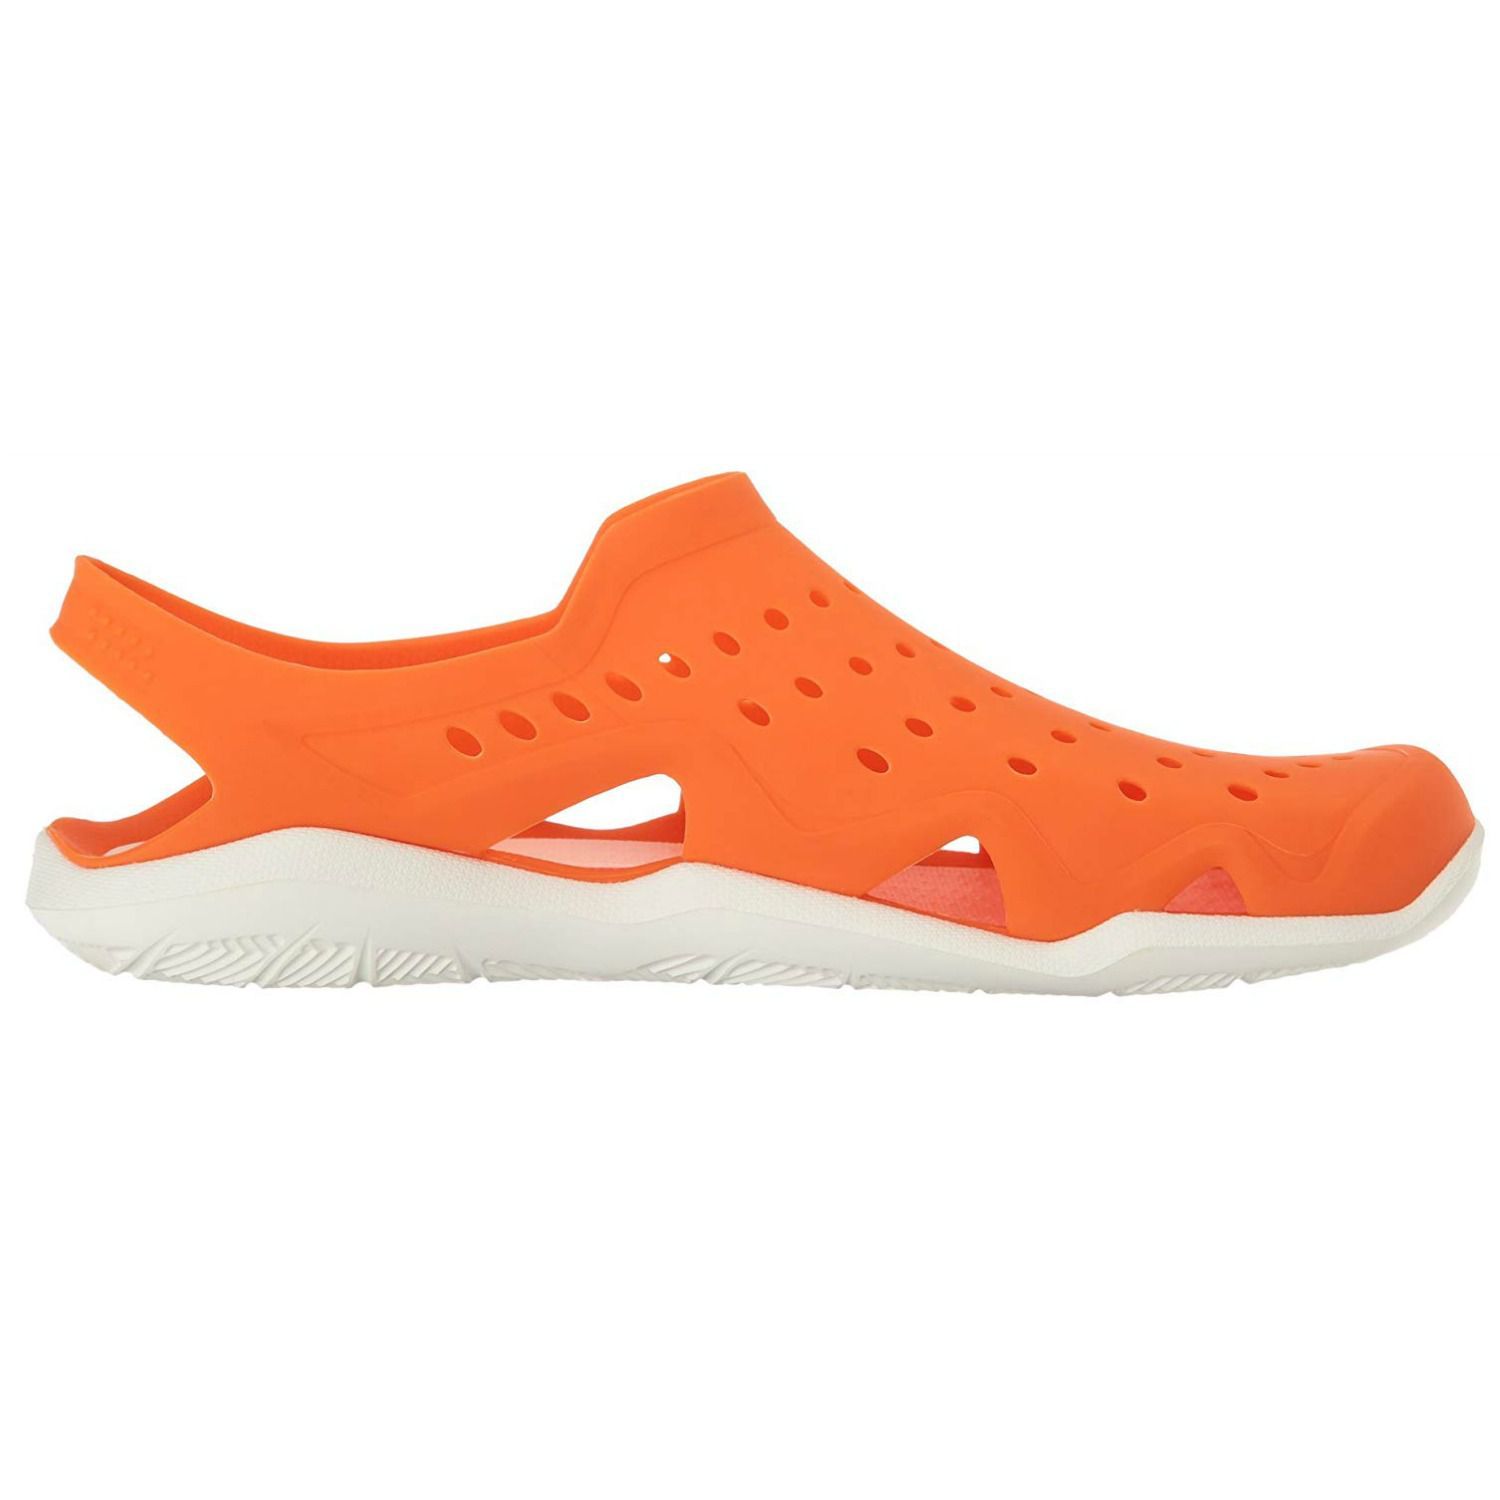 water shoes with ankle support